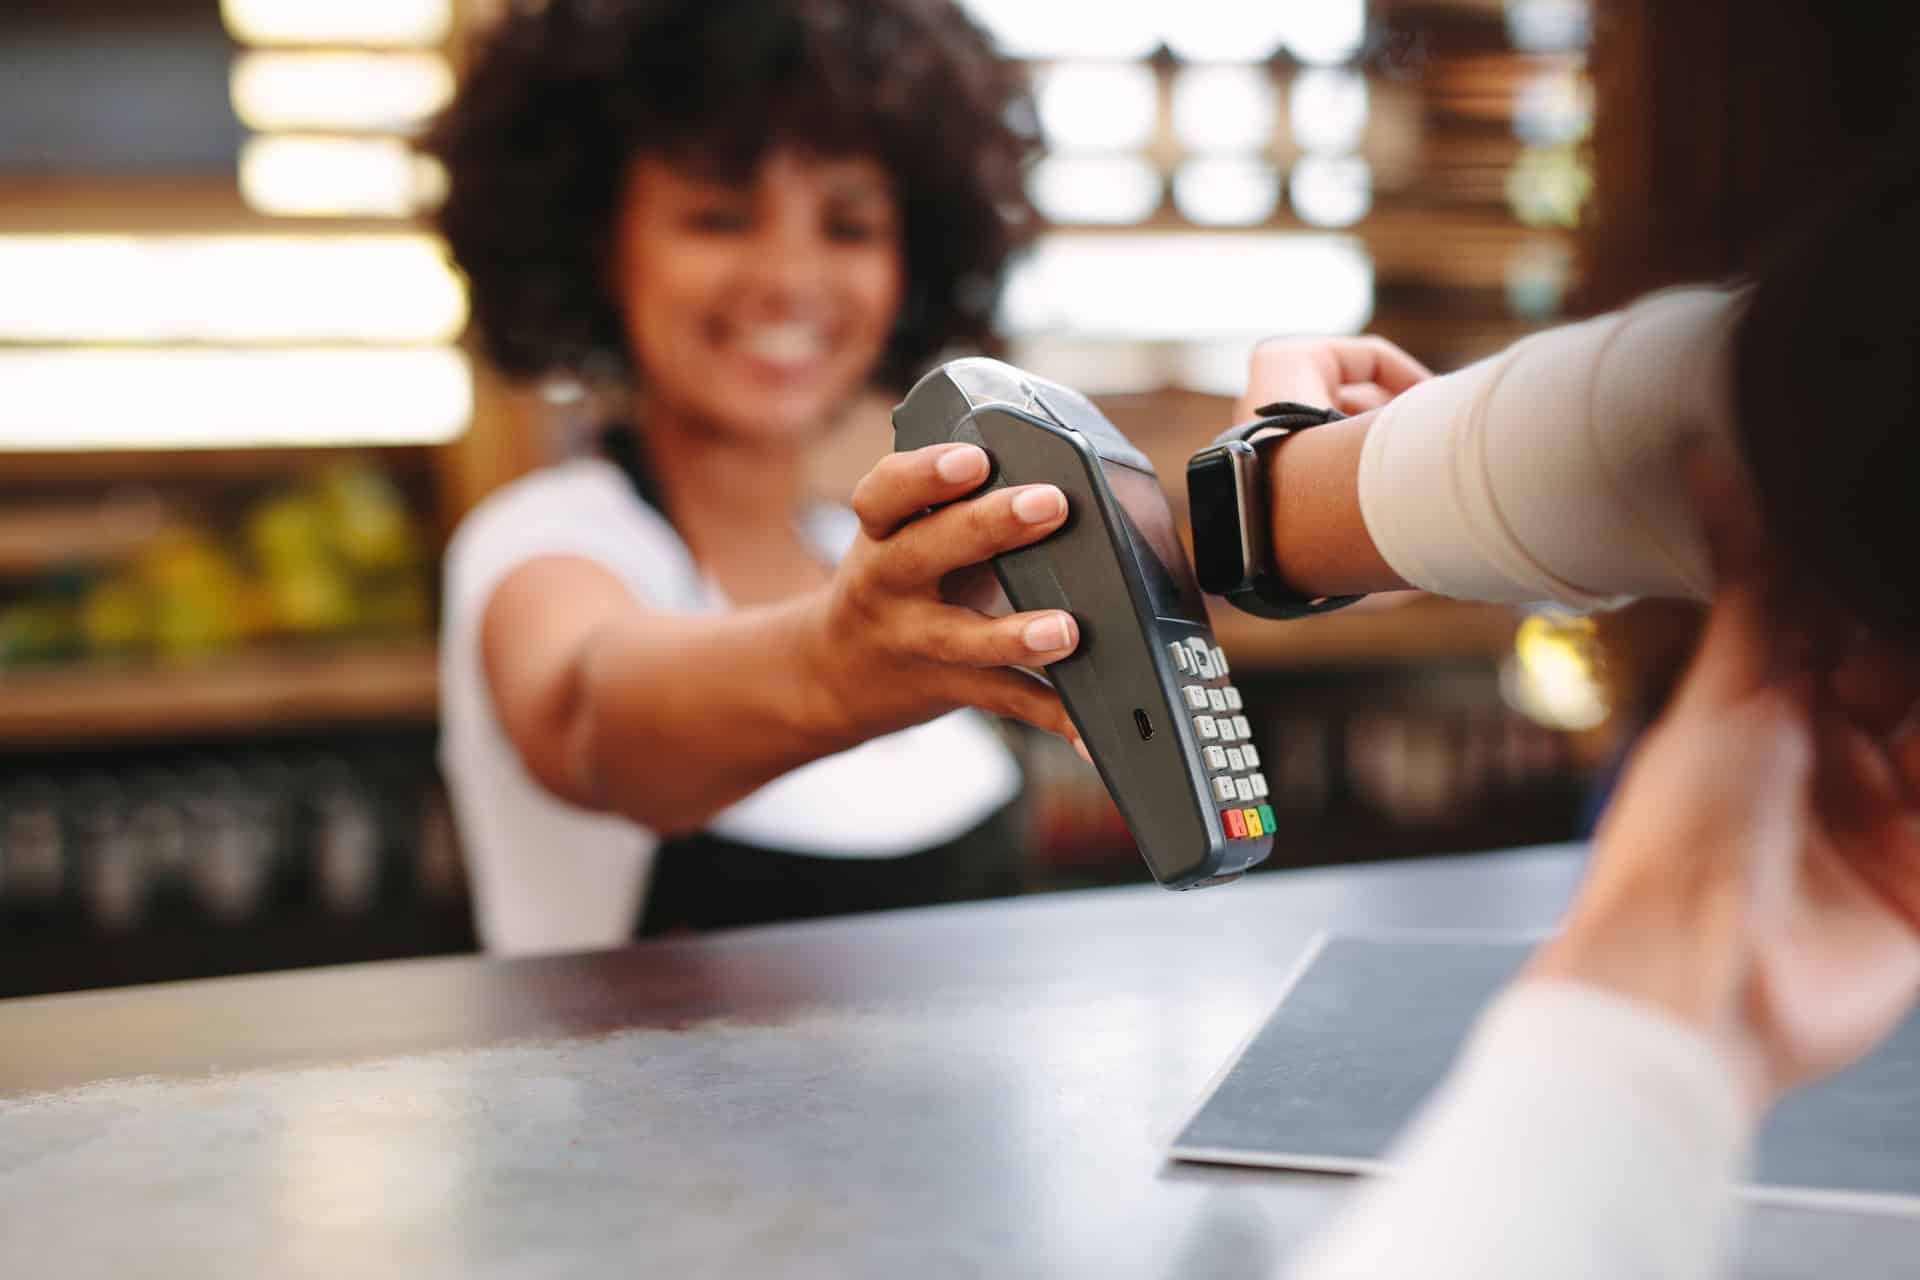 Mobile POS systems allow payments with smart watches